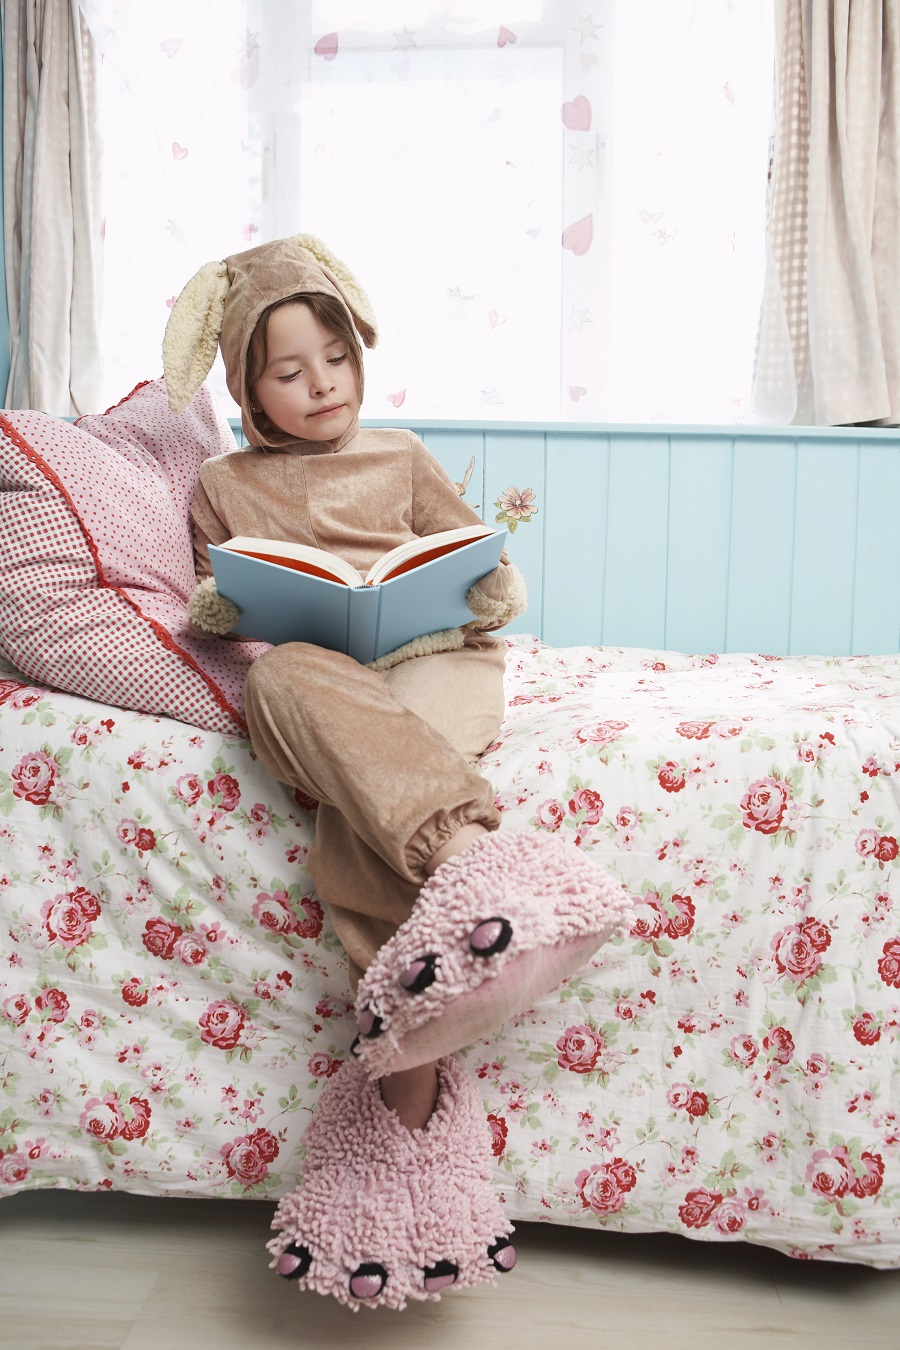 How You Make Your Child’s Bedroom More Sleep-Friendly